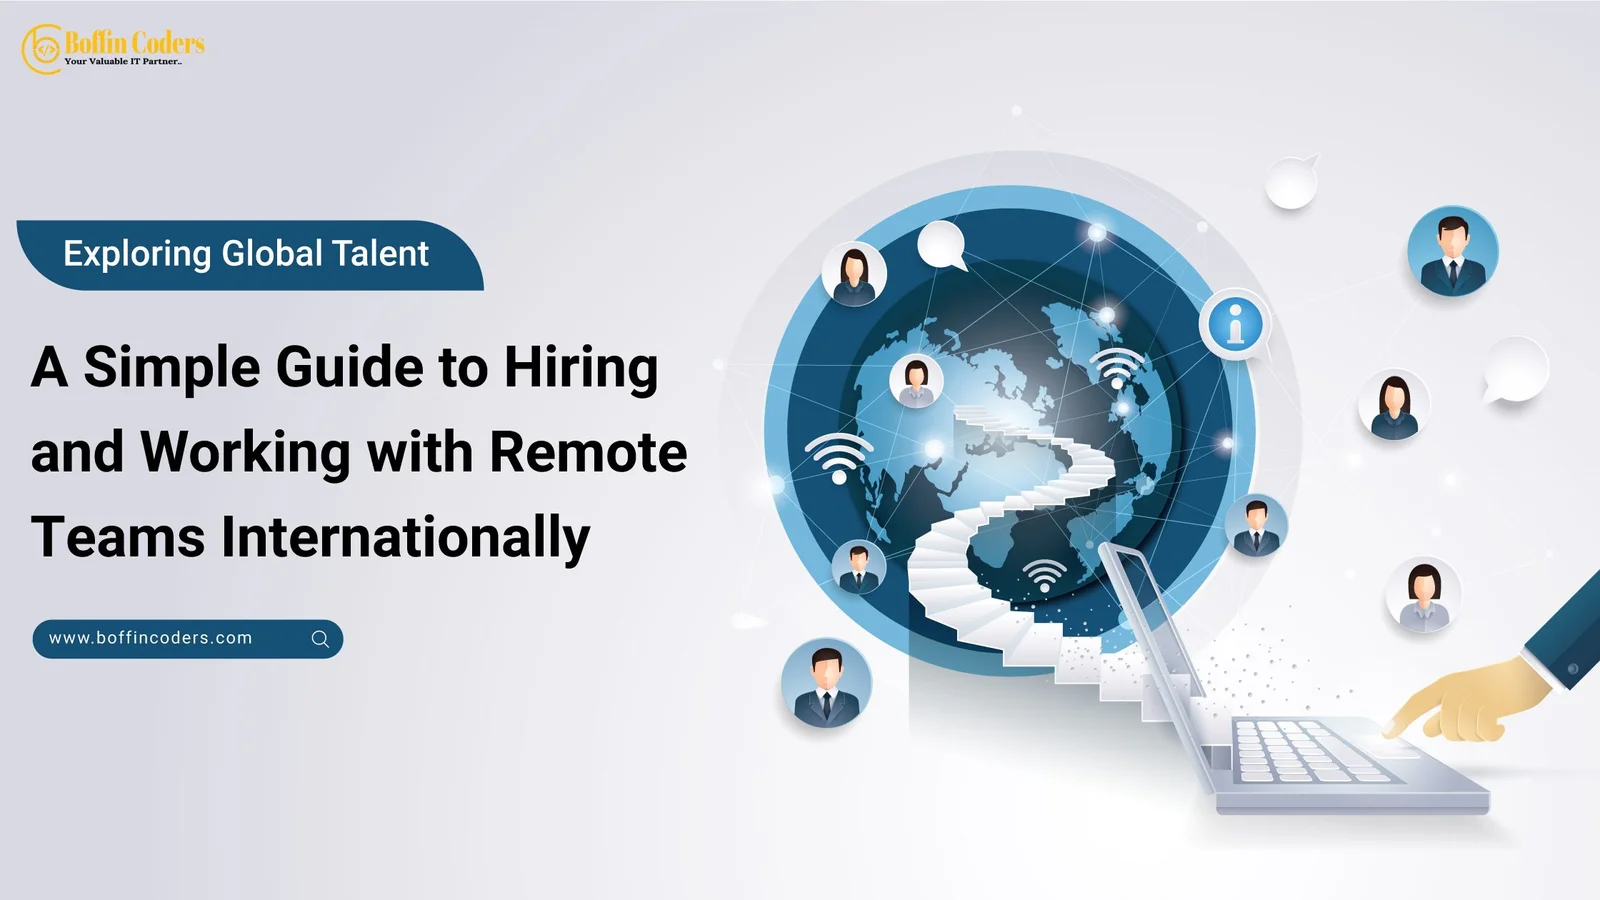 Exploring Global Talent: A Simple Guide to Hiring and Working with Remote Teams Internationally